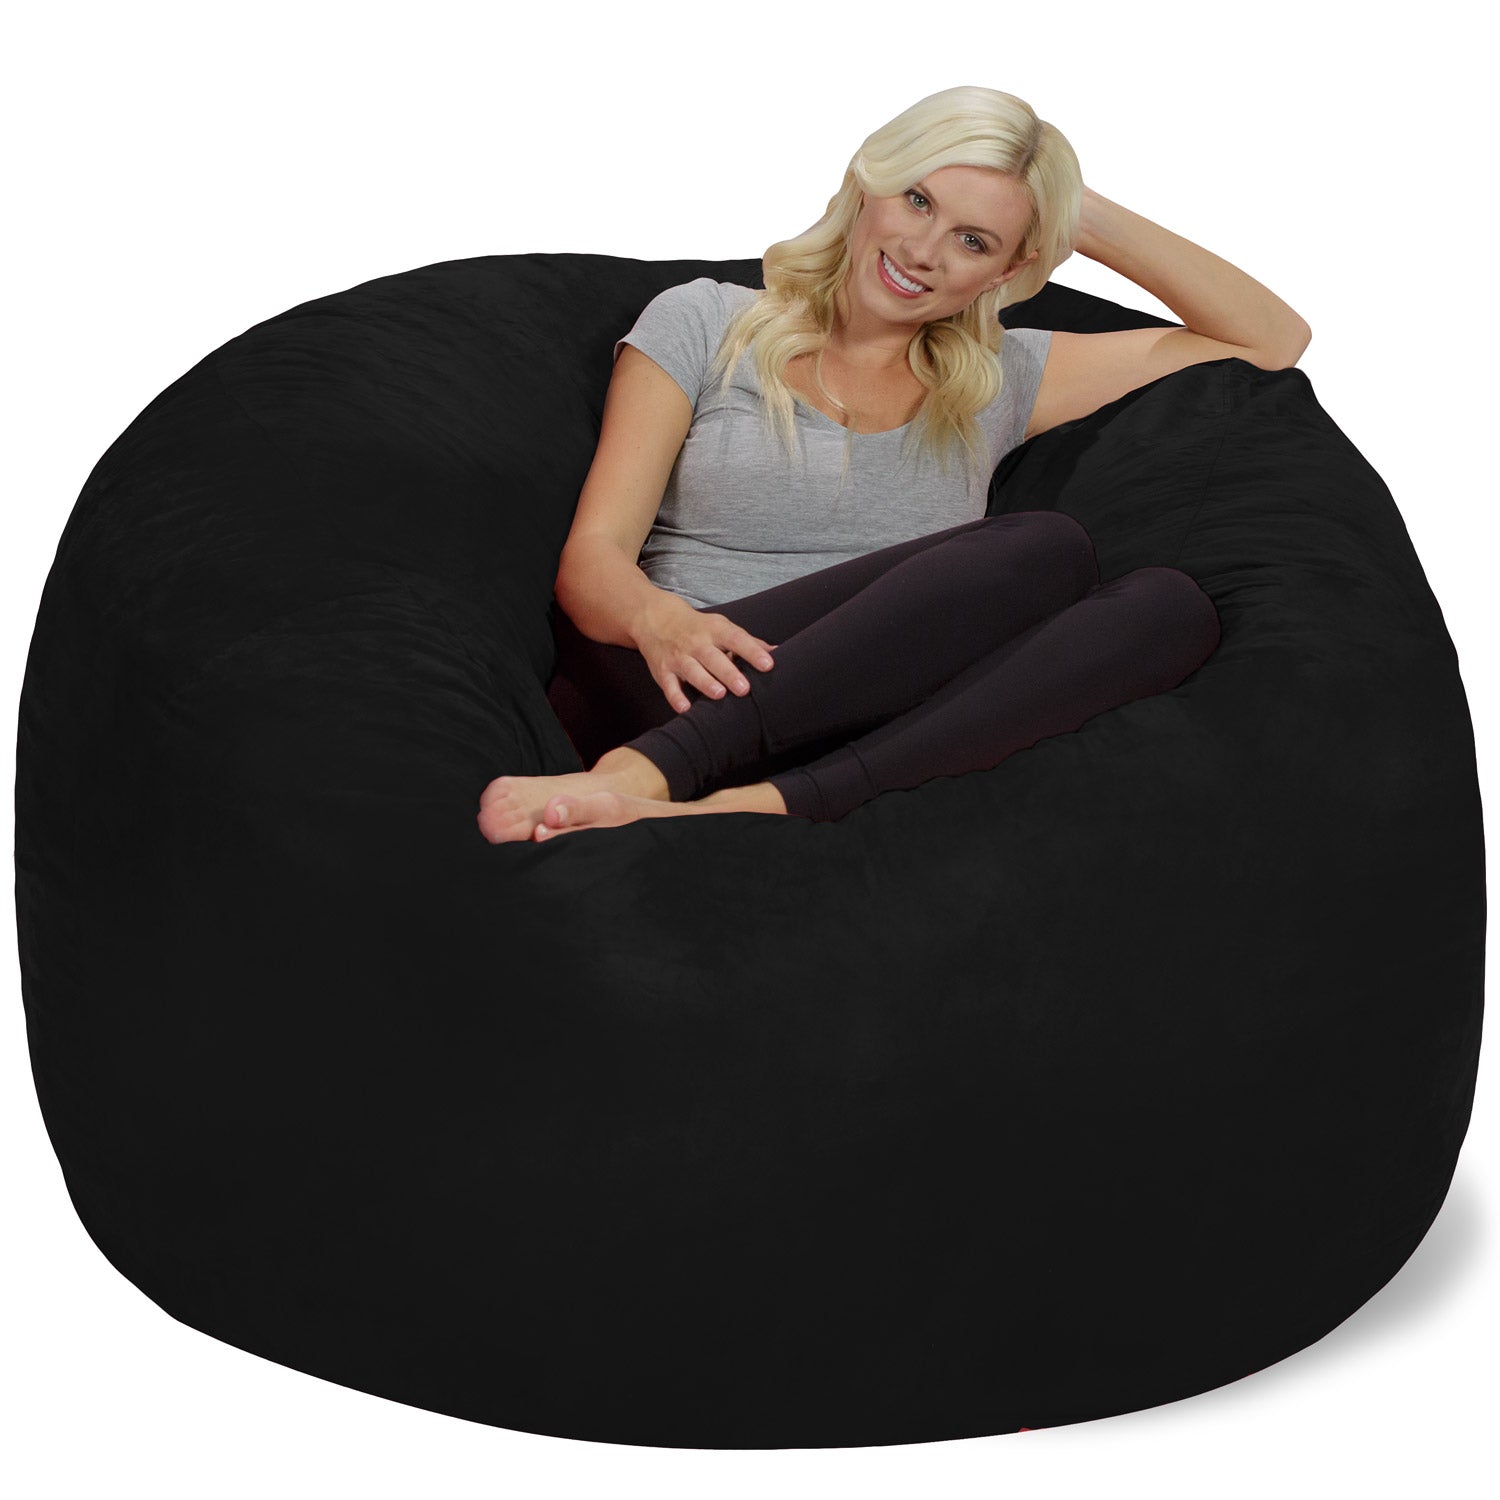 SkimmerSack II Camera Beanbag Support for Wildlife Photography